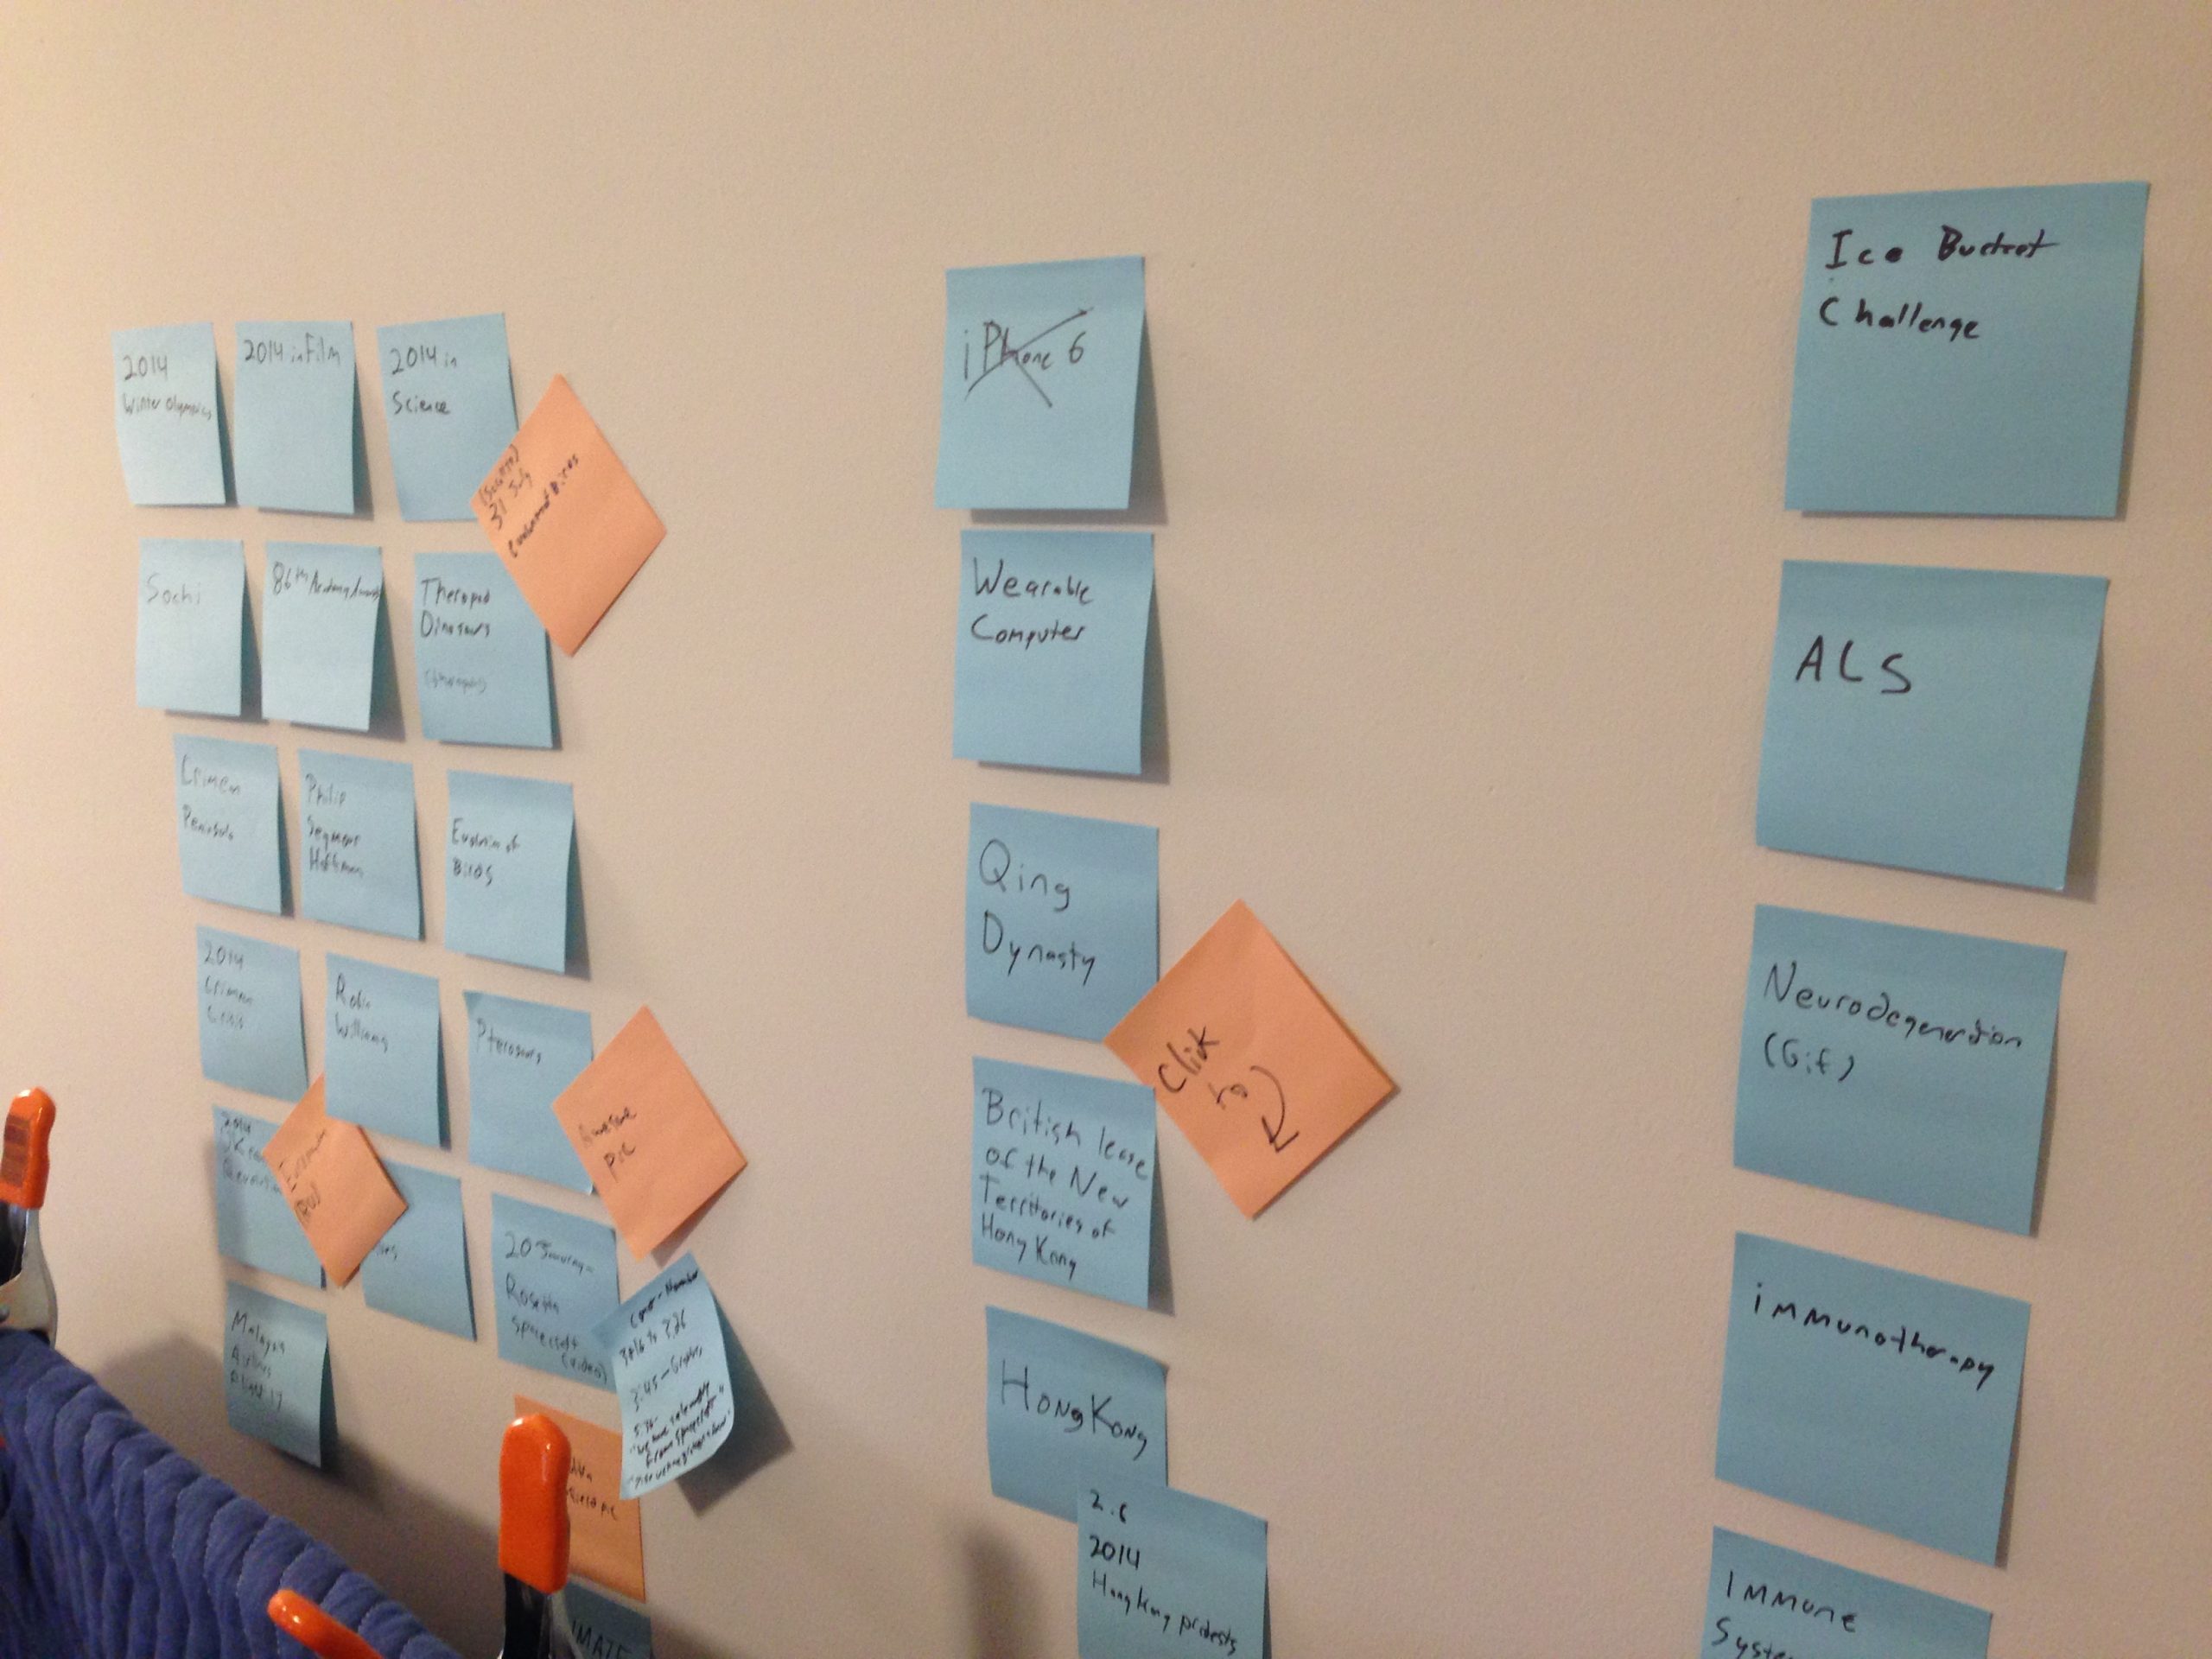 Post-its stuck to the wall for brainstorming